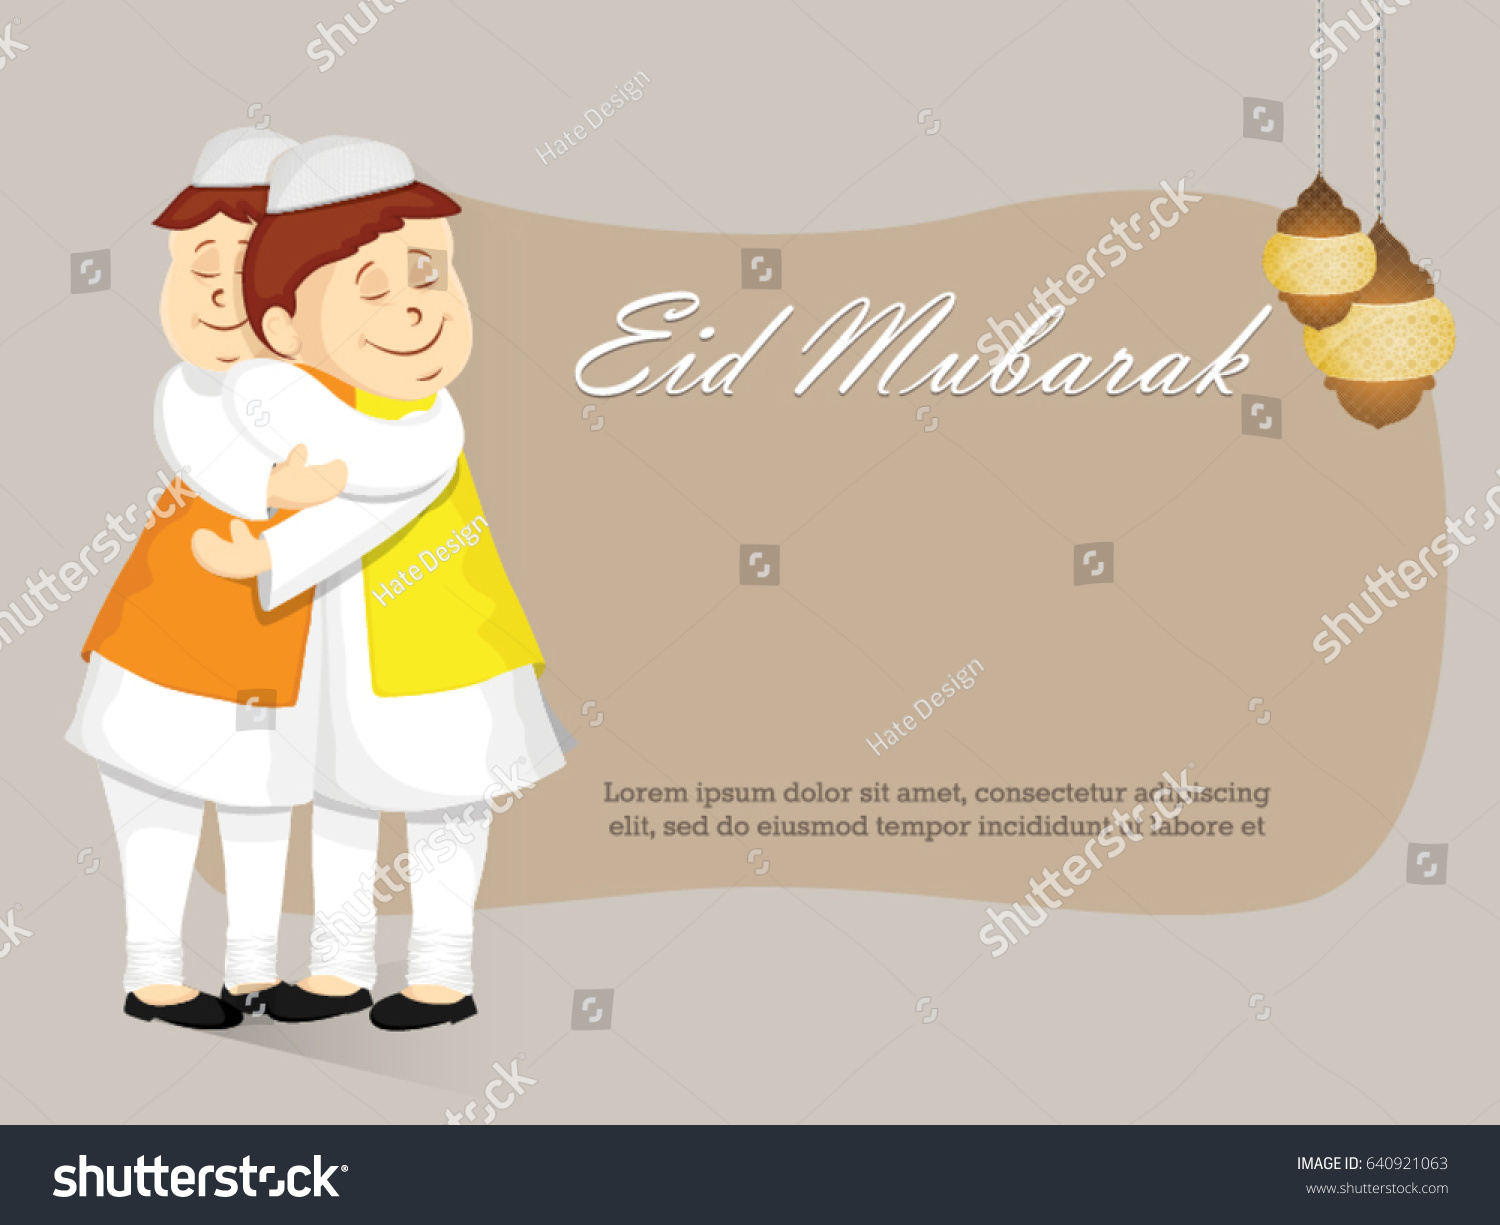 Eid Mubarak Vector Background with Happy Muslim Kids Hugging and Wishing for Islamic festival for banner